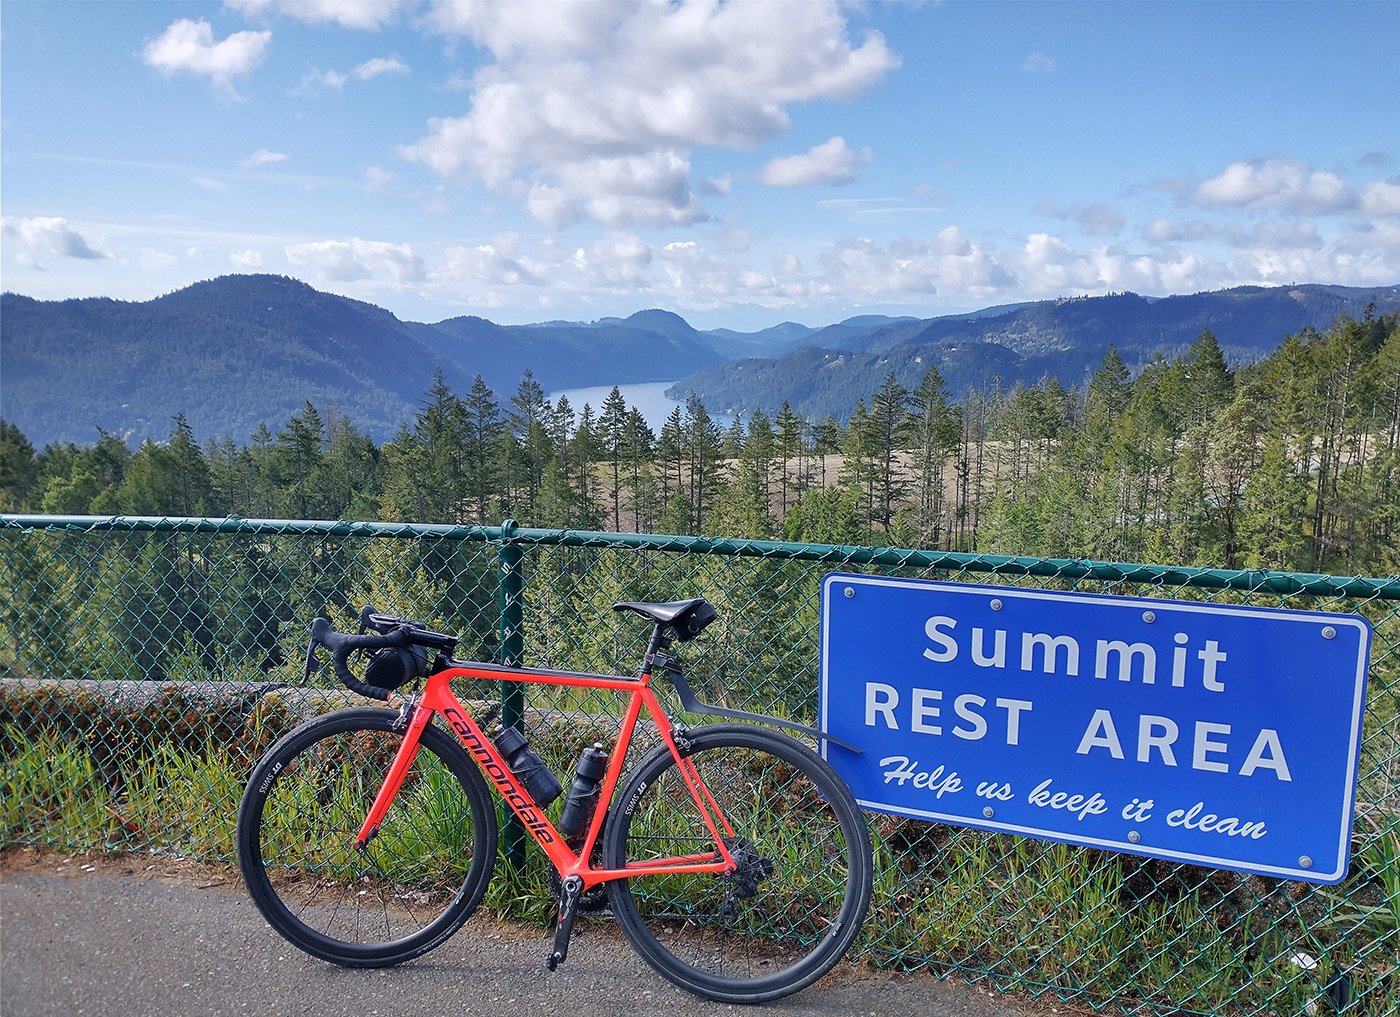  This ride brings you along the Malahat, one of the best views you can get on the peninsula. Most sketchy area to ride your bike on this look, however. 